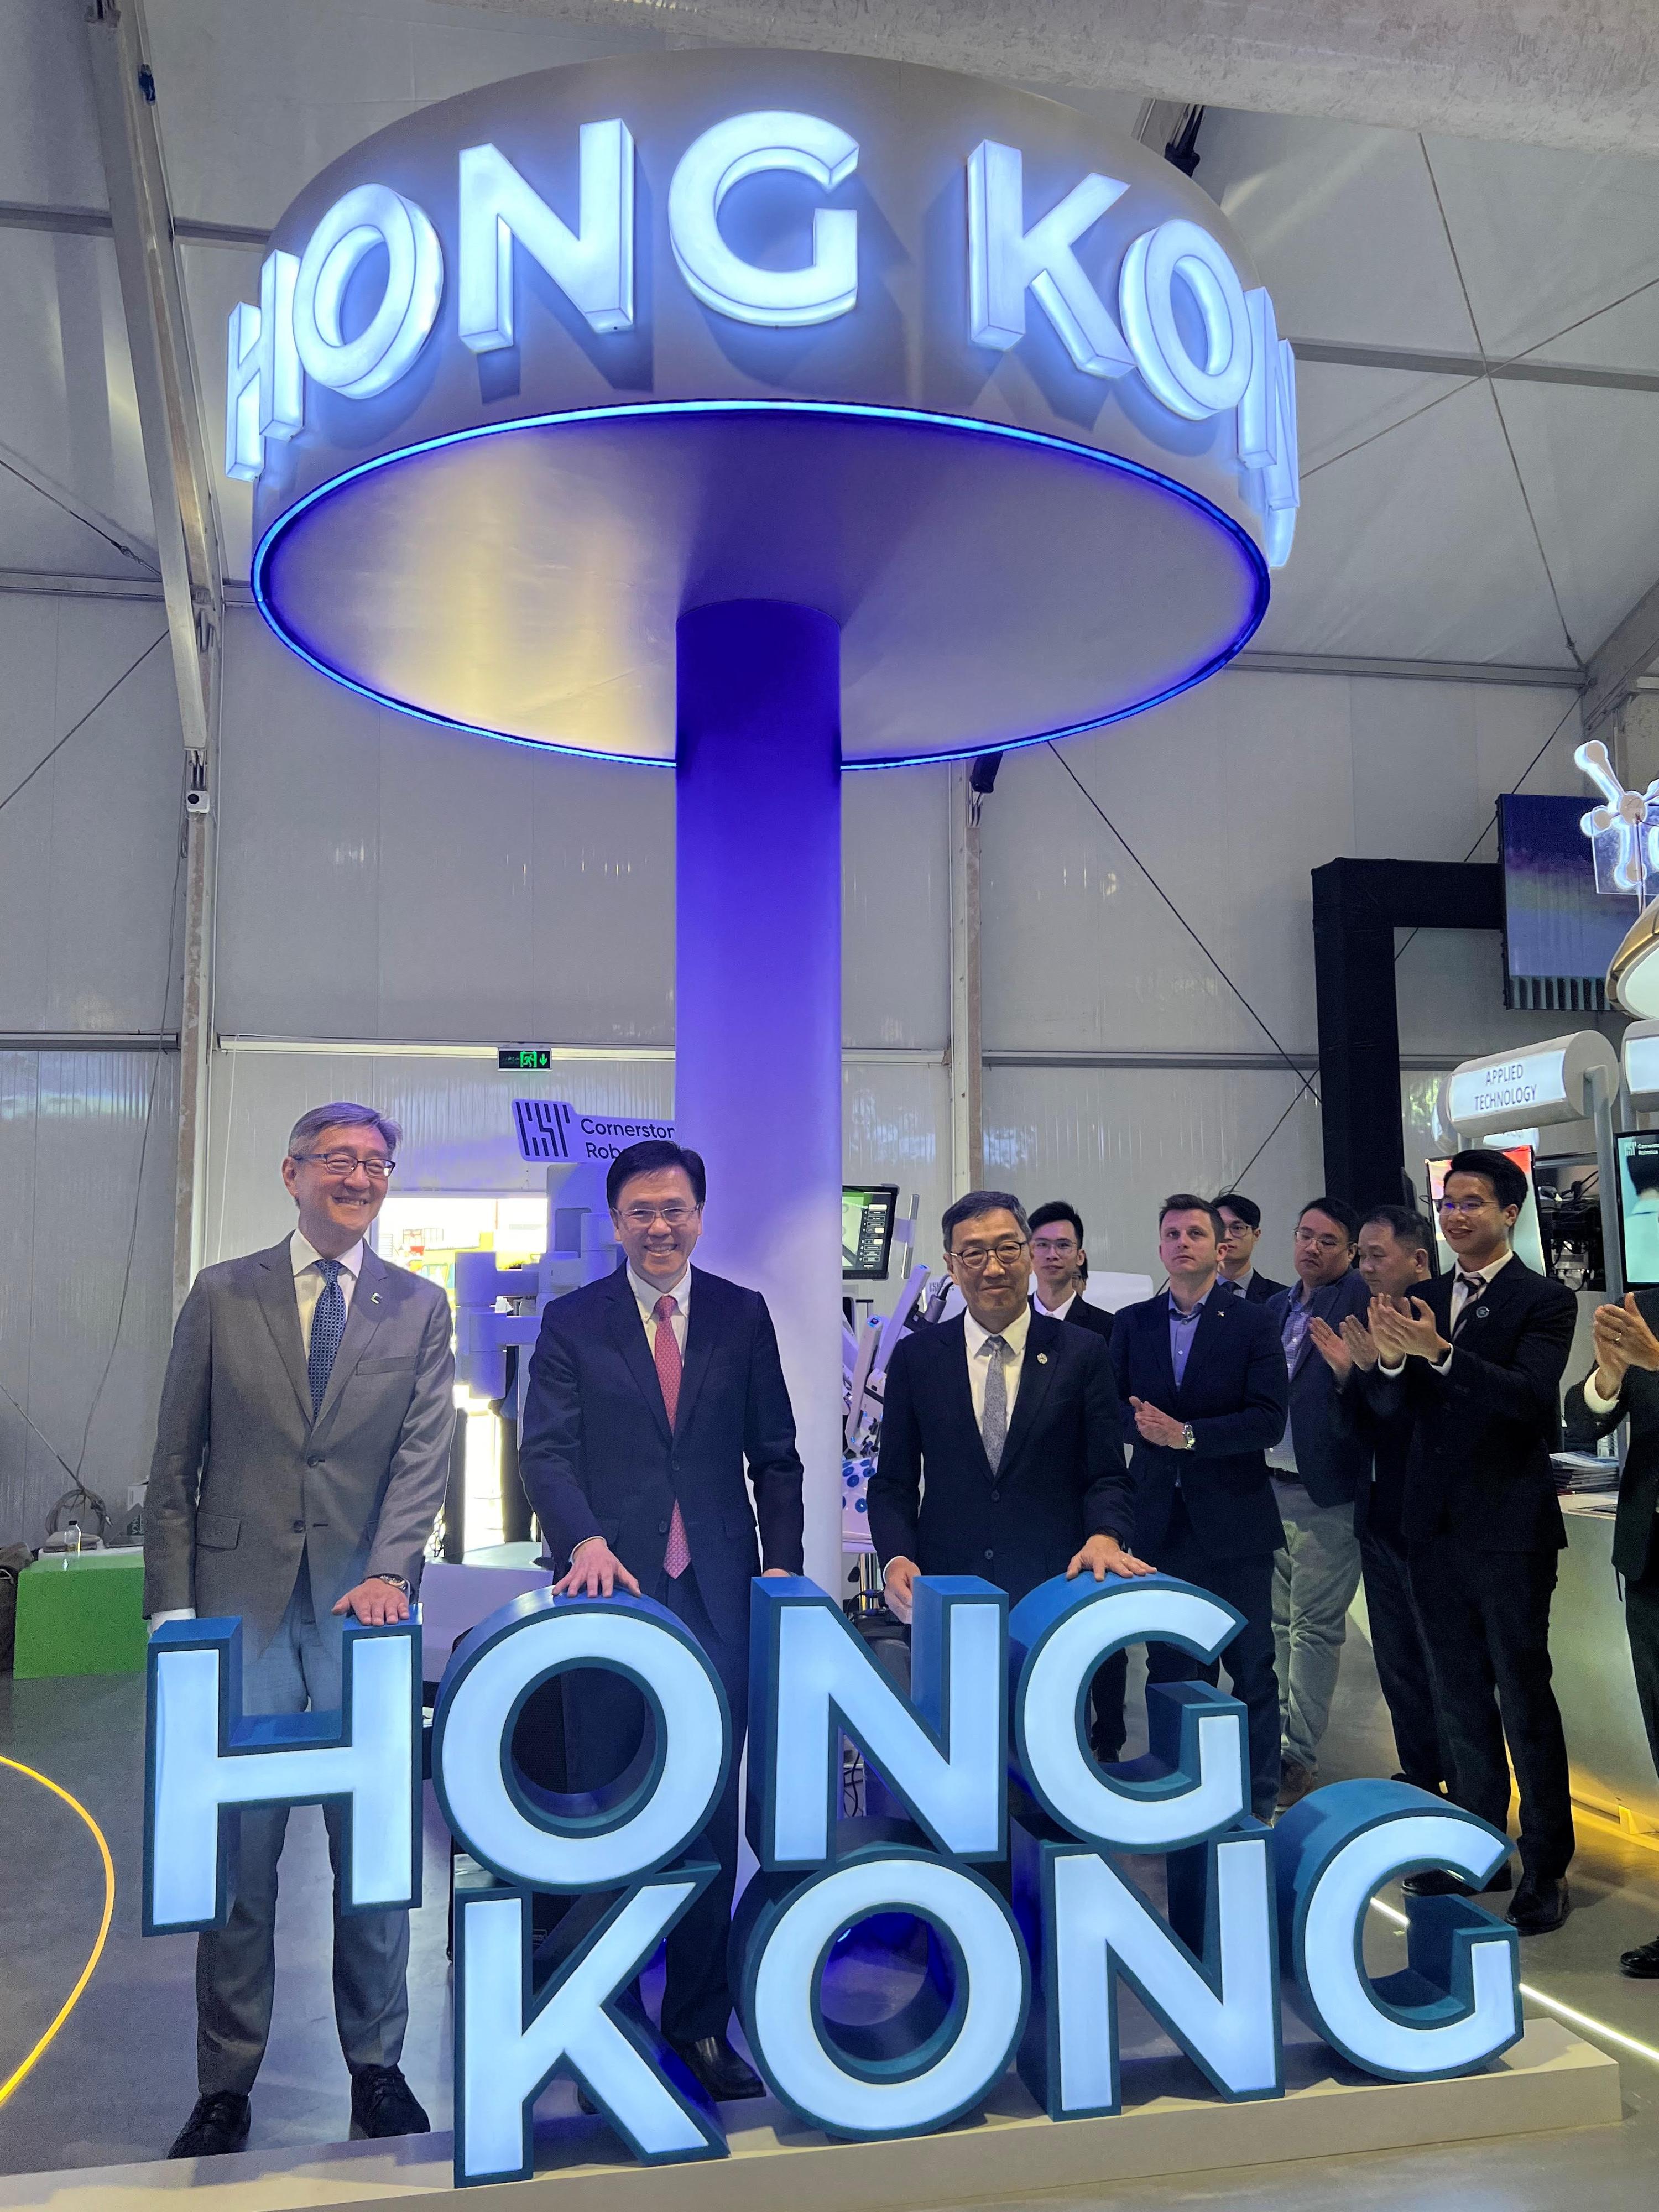 The Secretary for Innovation, Technology and Industry, Professor Sun Dong (second left), officiated at the opening ceremony of the Hong Kong Pavilion at the LEAP 2024 technology conference on March 4 (Riyadh time). Looking on are the Chief Executive Officer of the Hong Kong Science and Technology Parks Corporation, Mr Albert Wong (third left), and the Chief Executive Officer of the Hong Kong Cyberport Management Company Limited, Mr Peter Yan (first left).